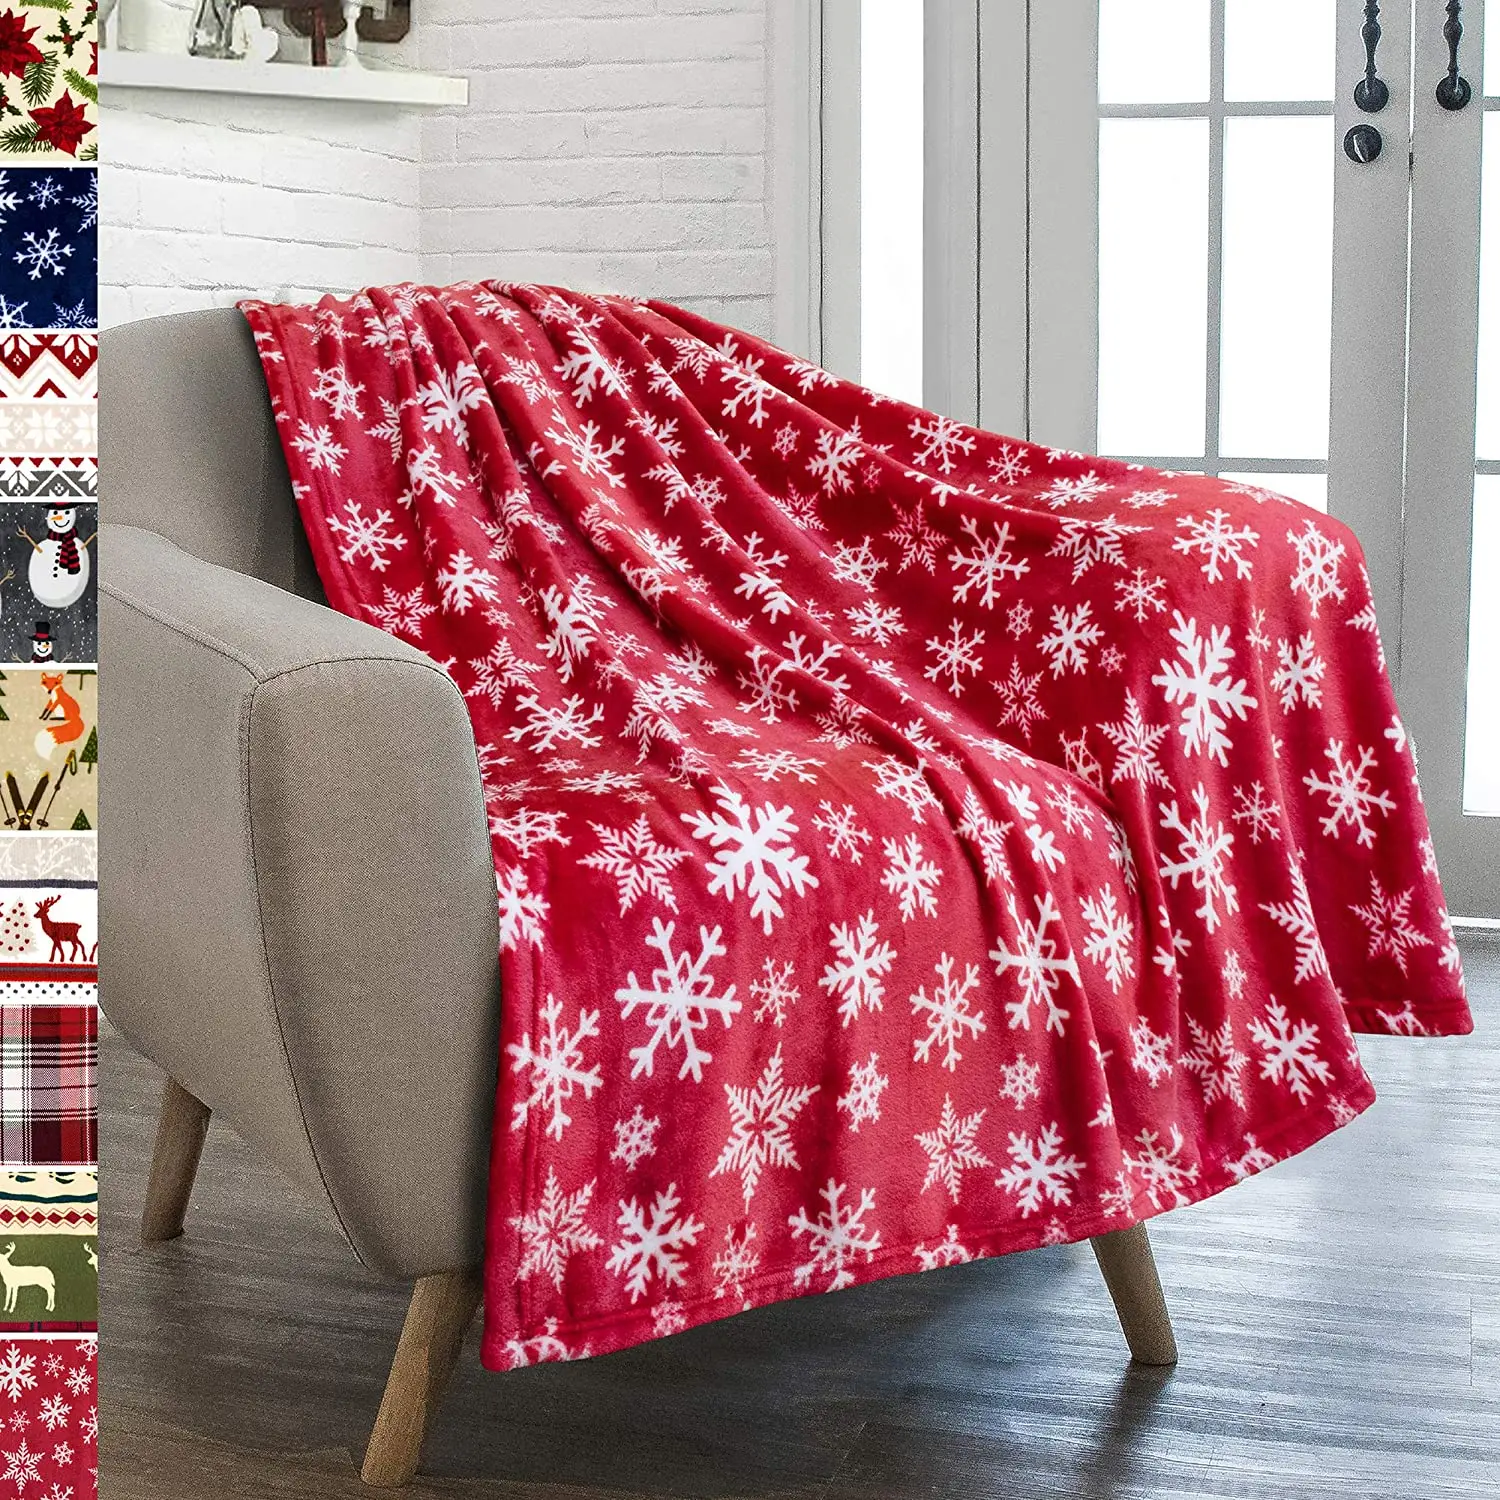 Sofa Bed New Blush Pink 125 x 150cm Supersoft Snowflake Xmas Throw Blanket 